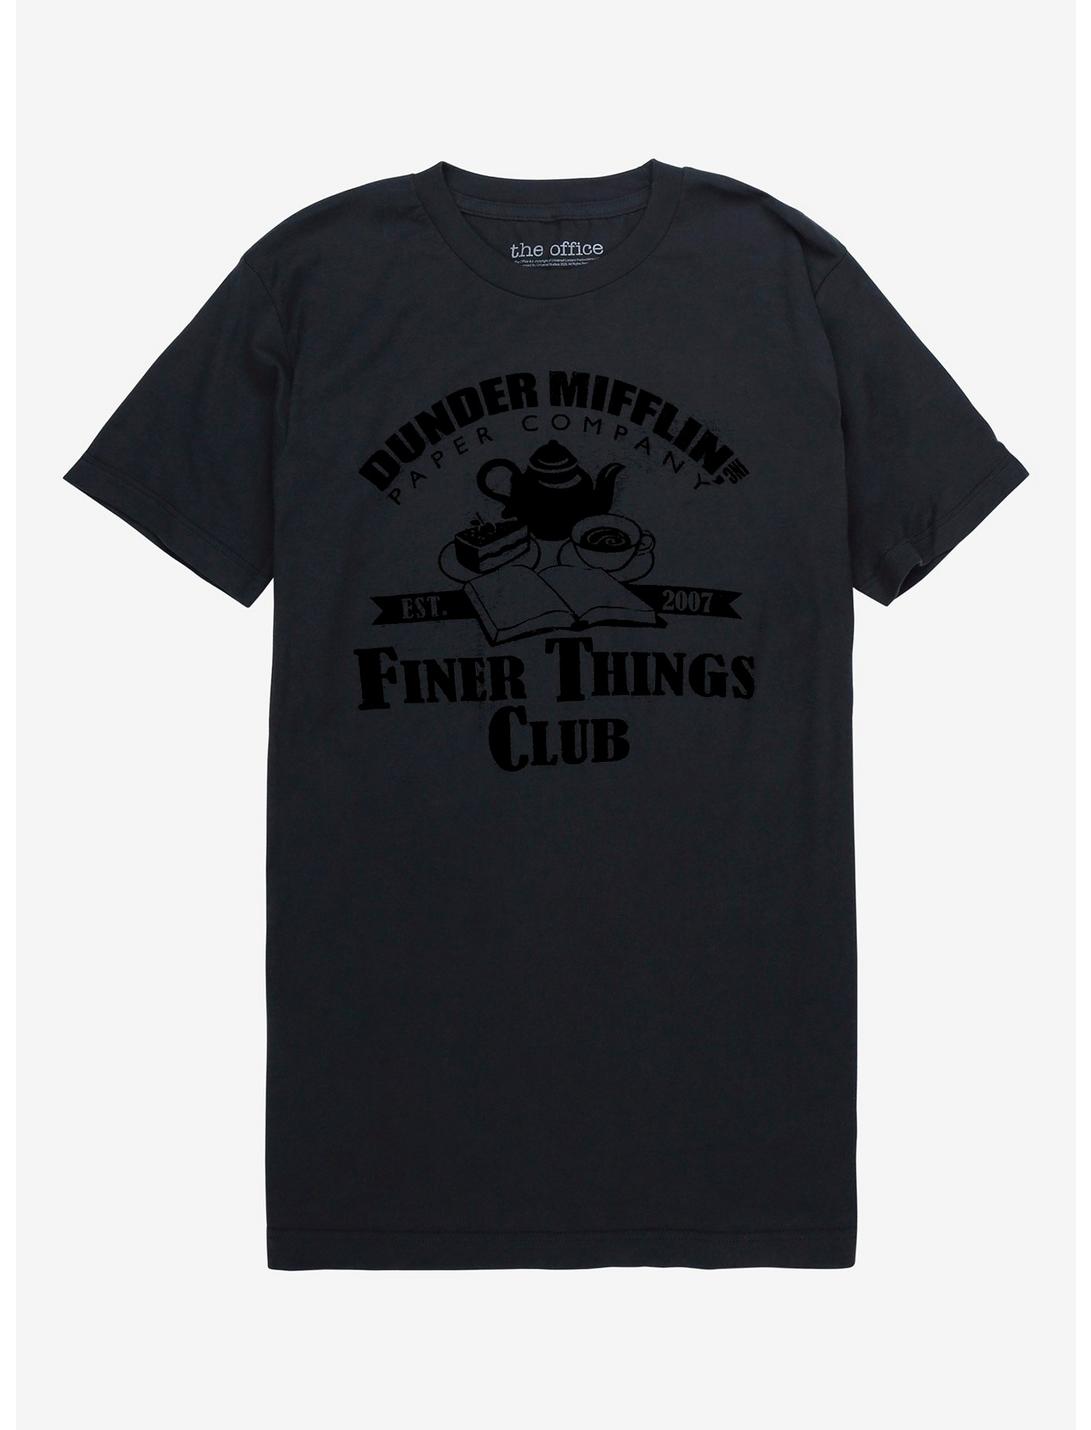 The Office Finer Things Club T-Shirt, BLACK, hi-res